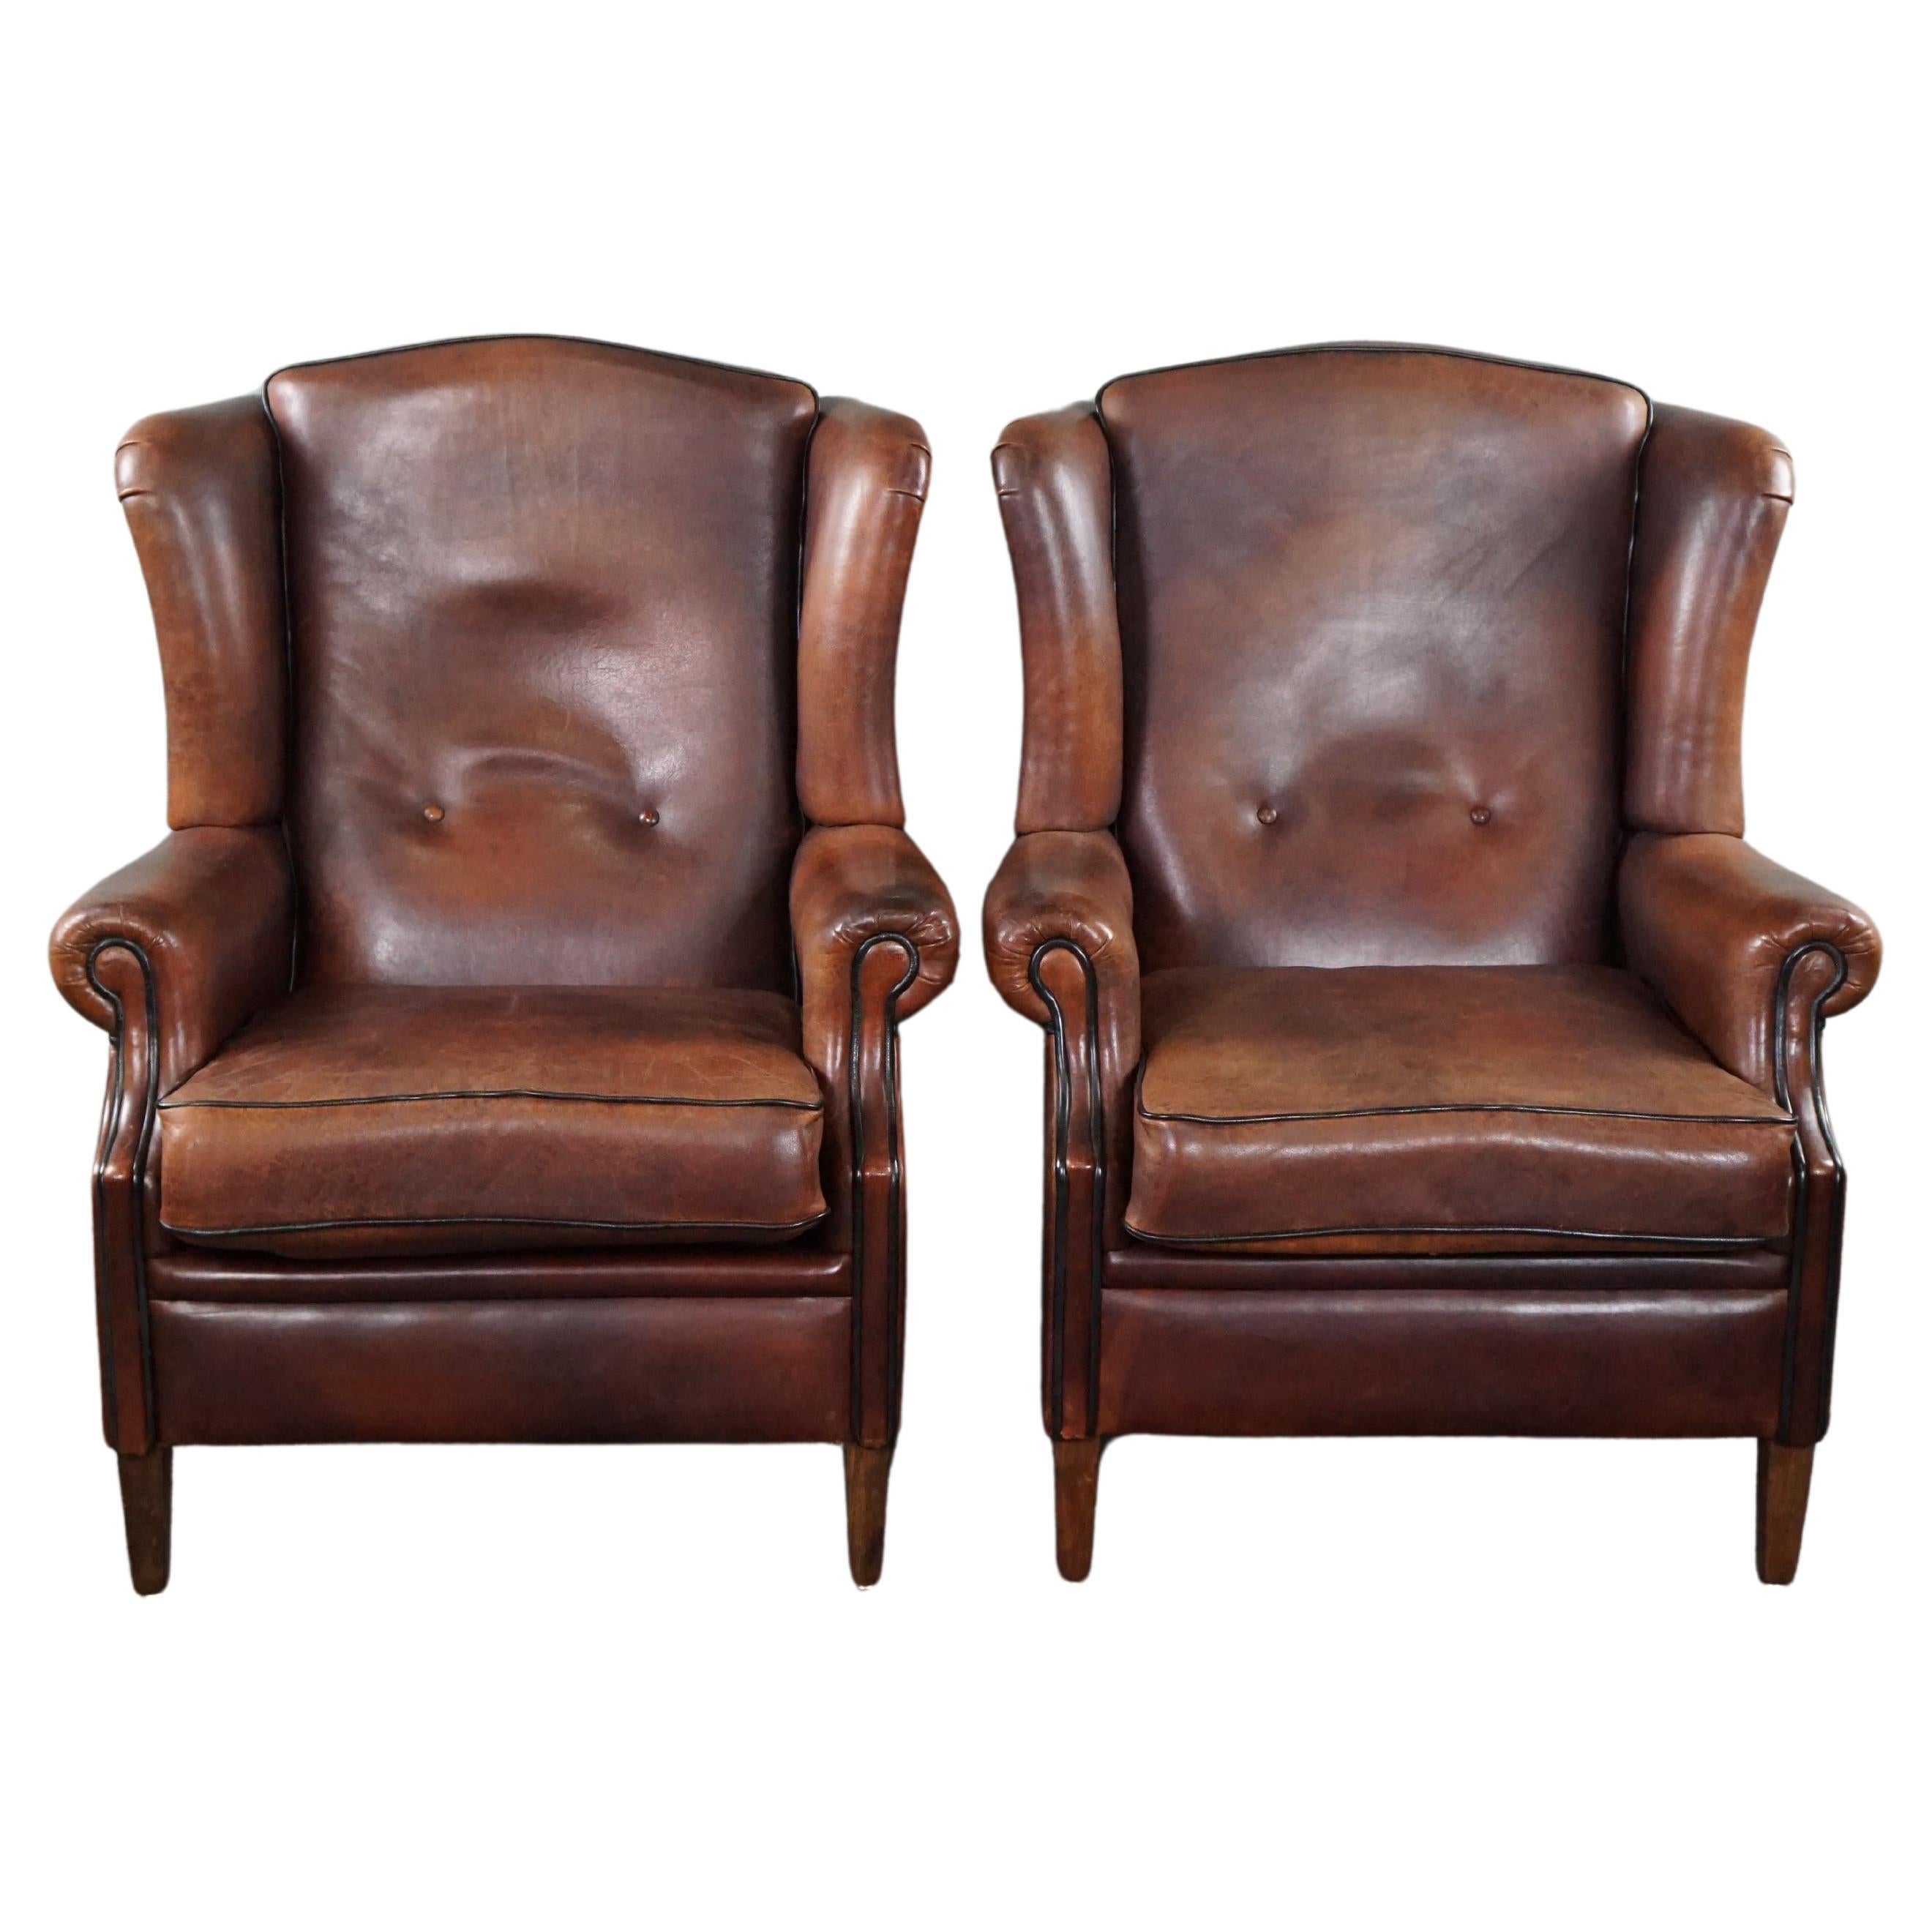 Well-fitting set of 2 sheep leather wing chairs For Sale